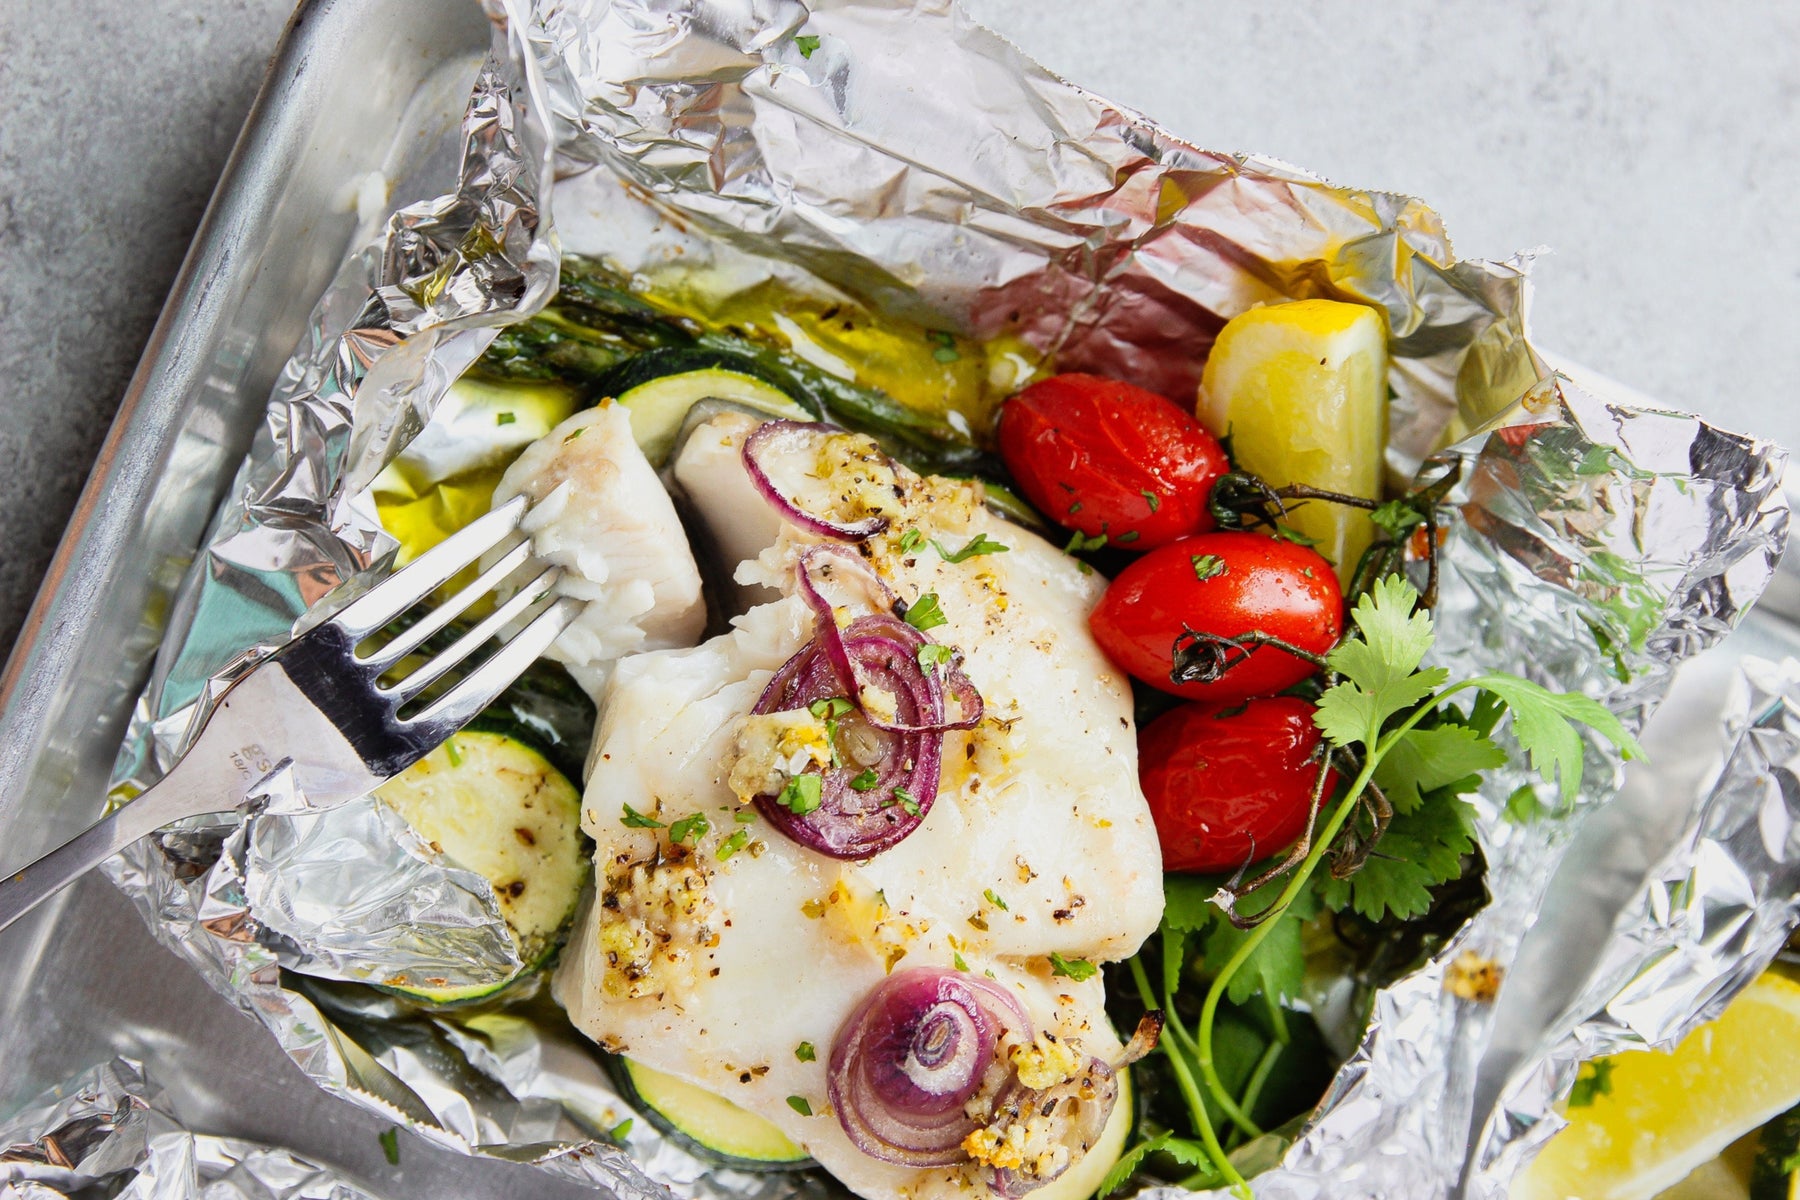 Baked Fish In Foil With Vegetables Recipe Sitka Salmon Shares